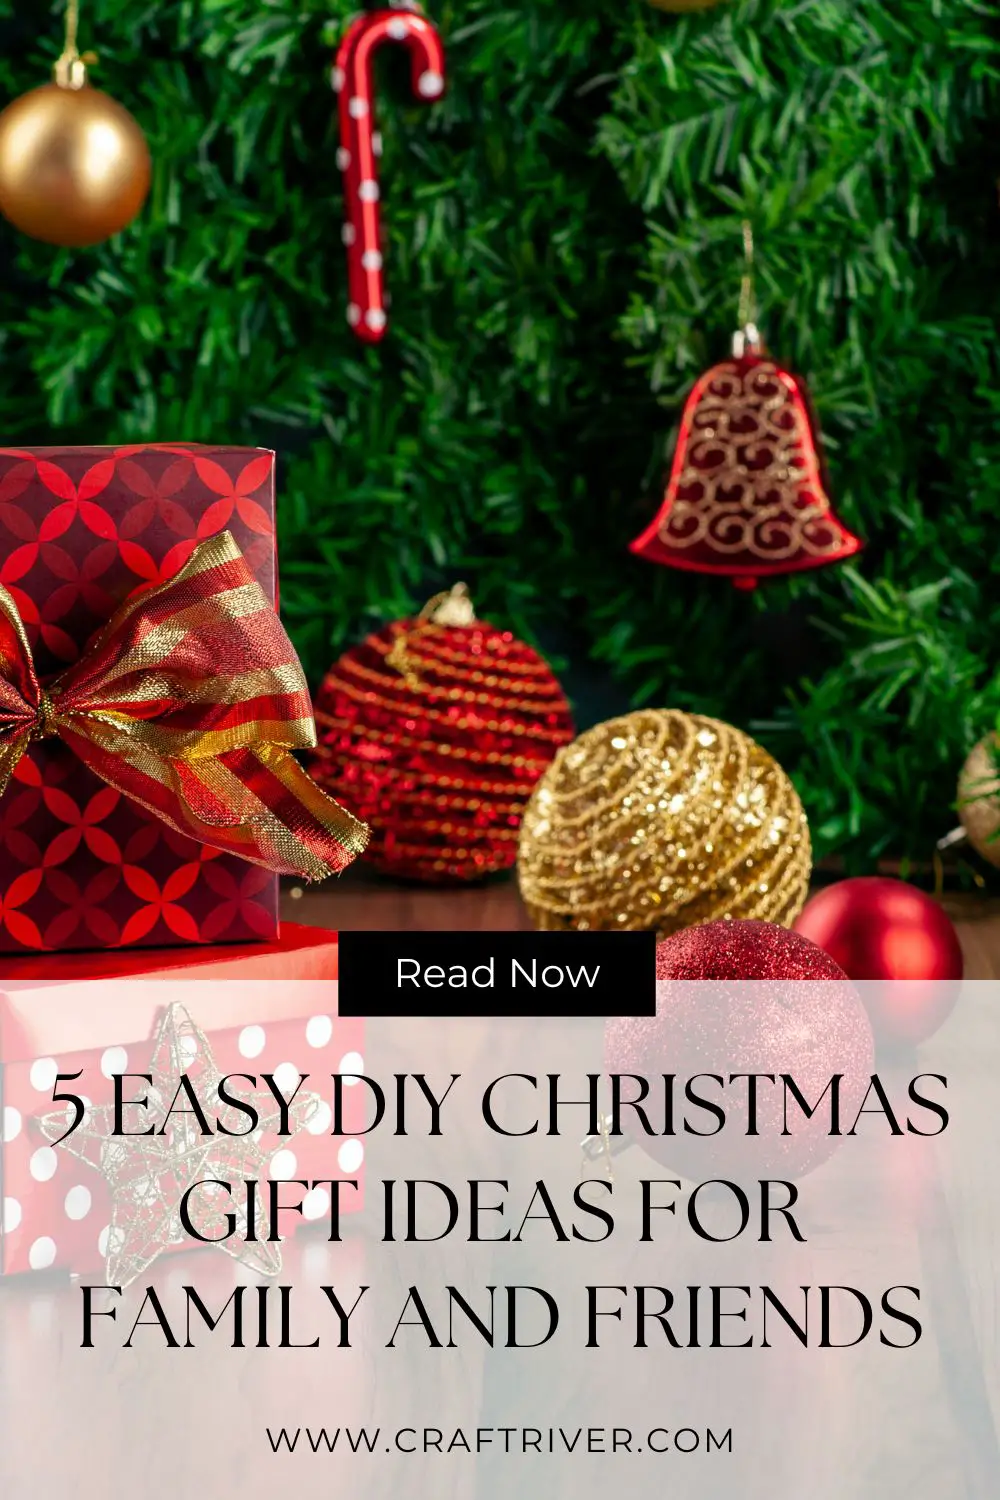 DIY Christmas Gifts for Family and Friends